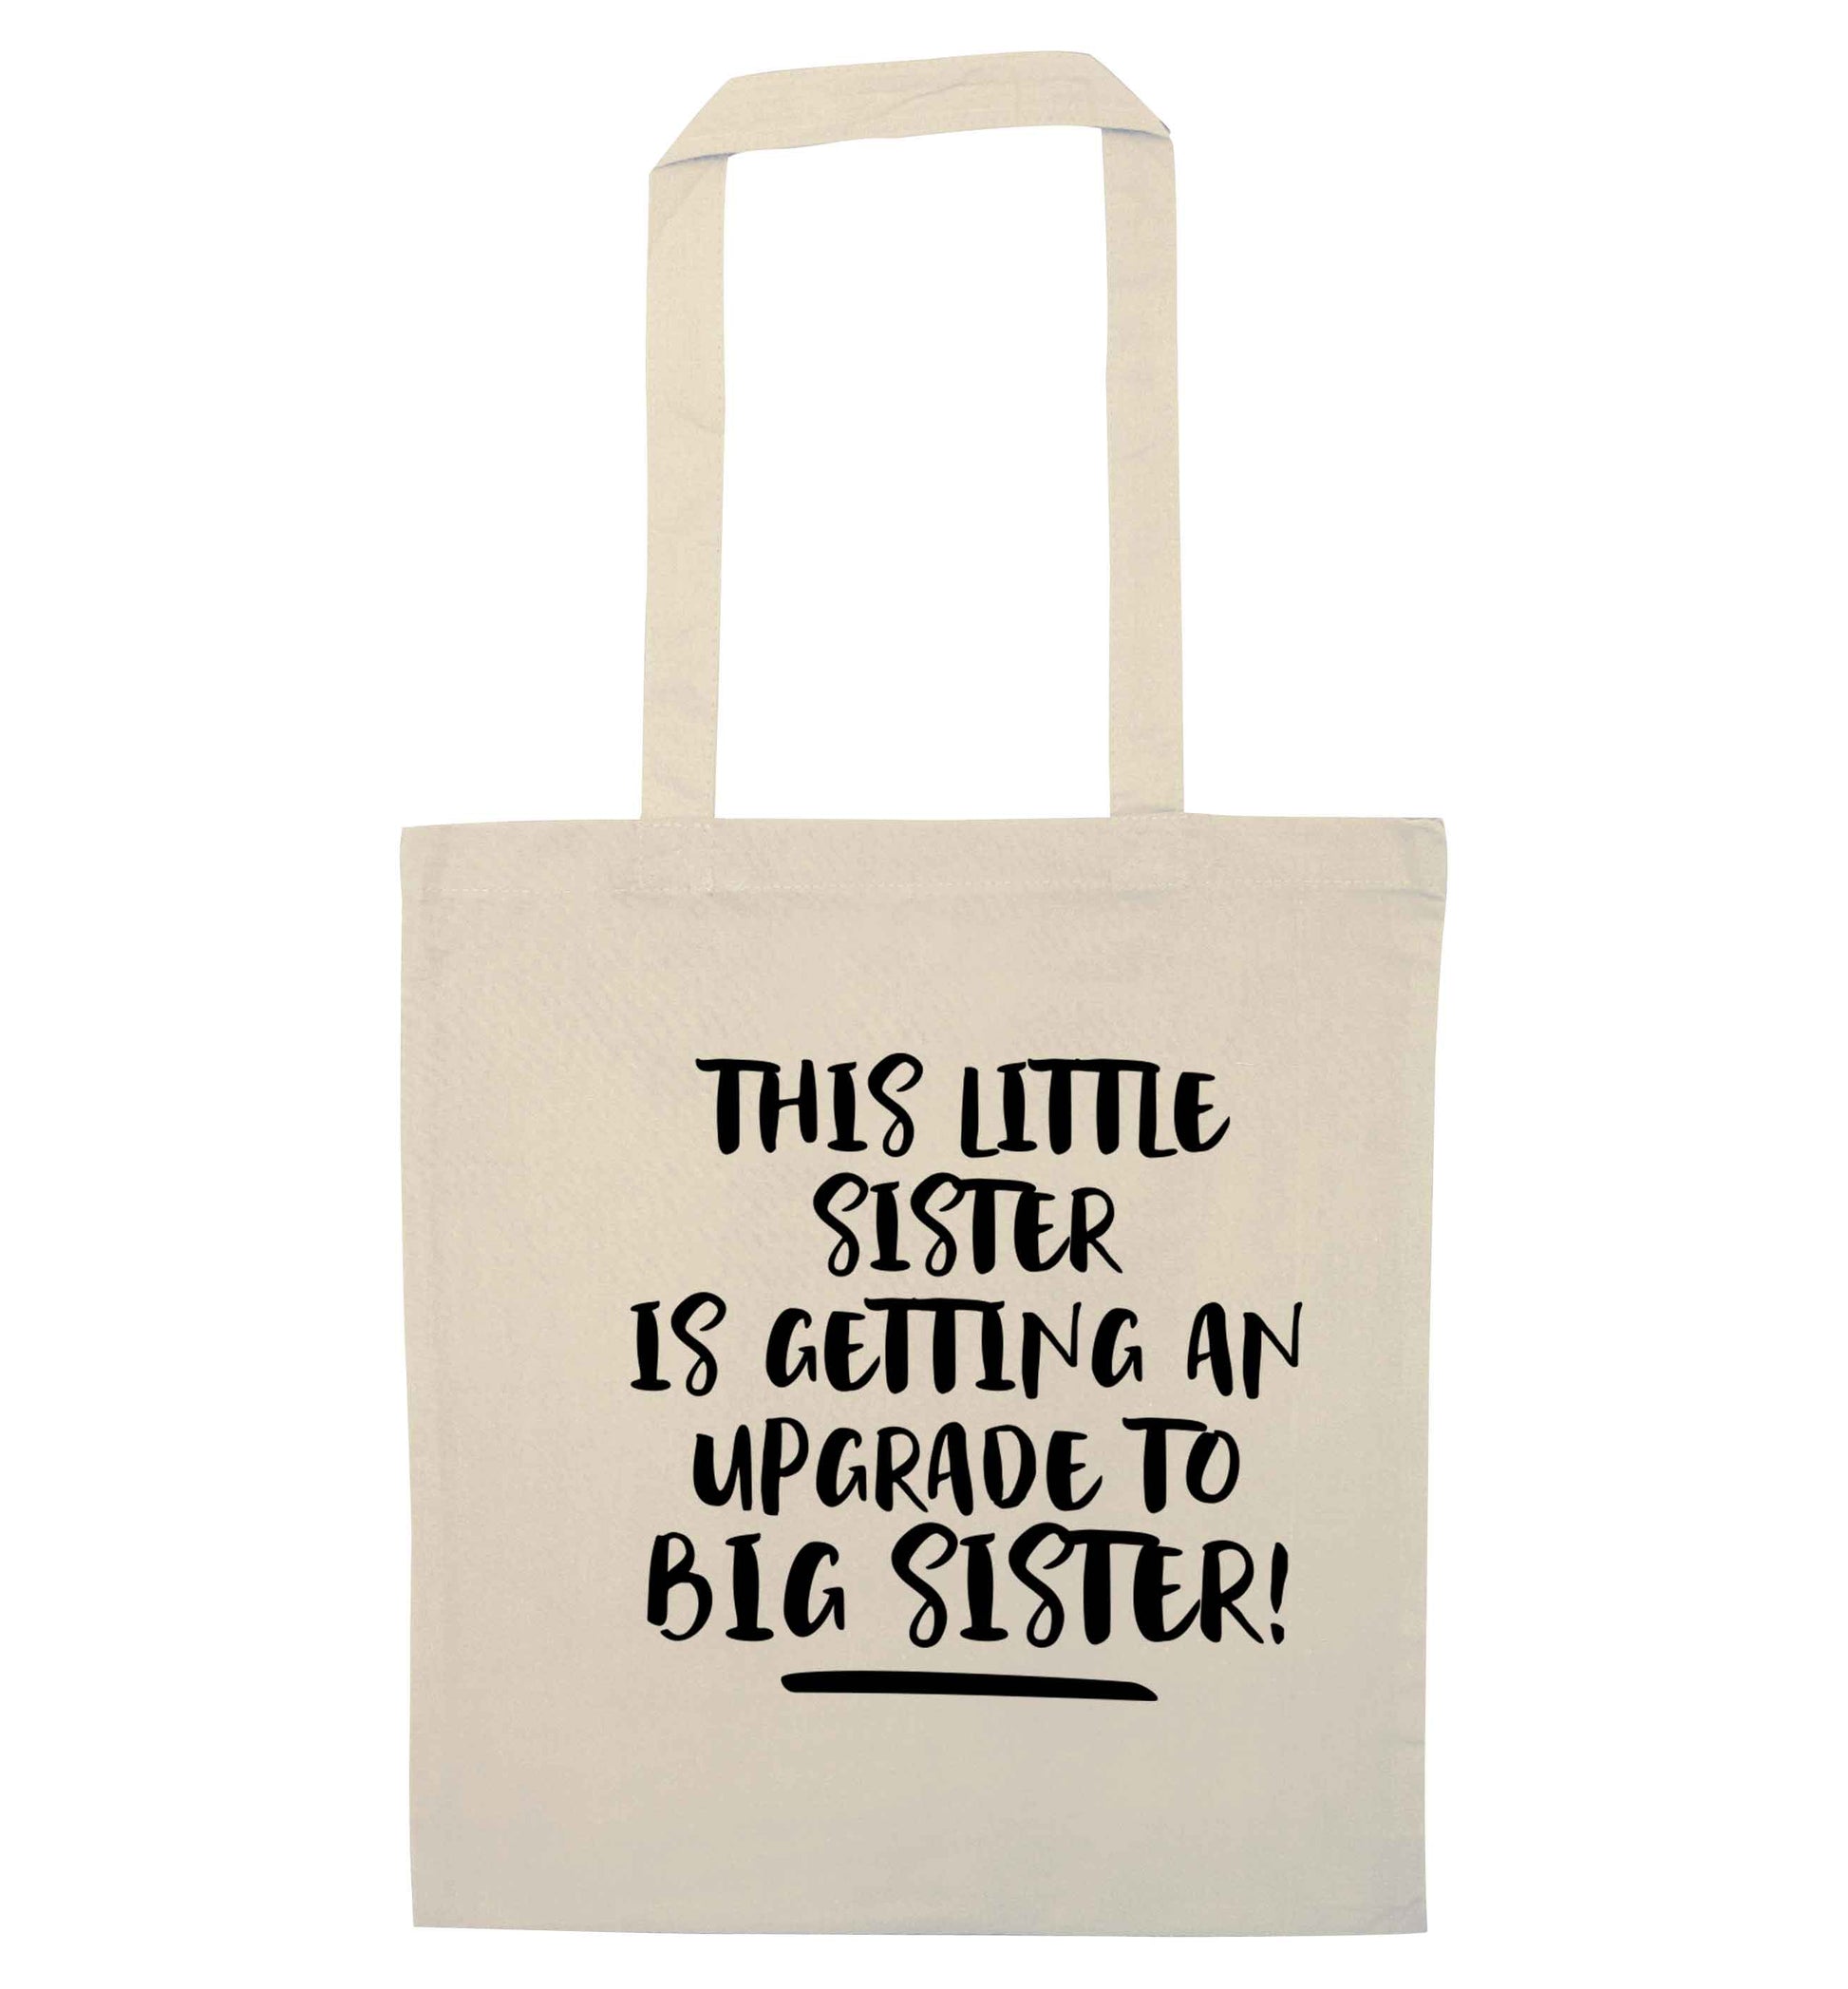 This little sister is getting an upgrade to big sister! natural tote bag